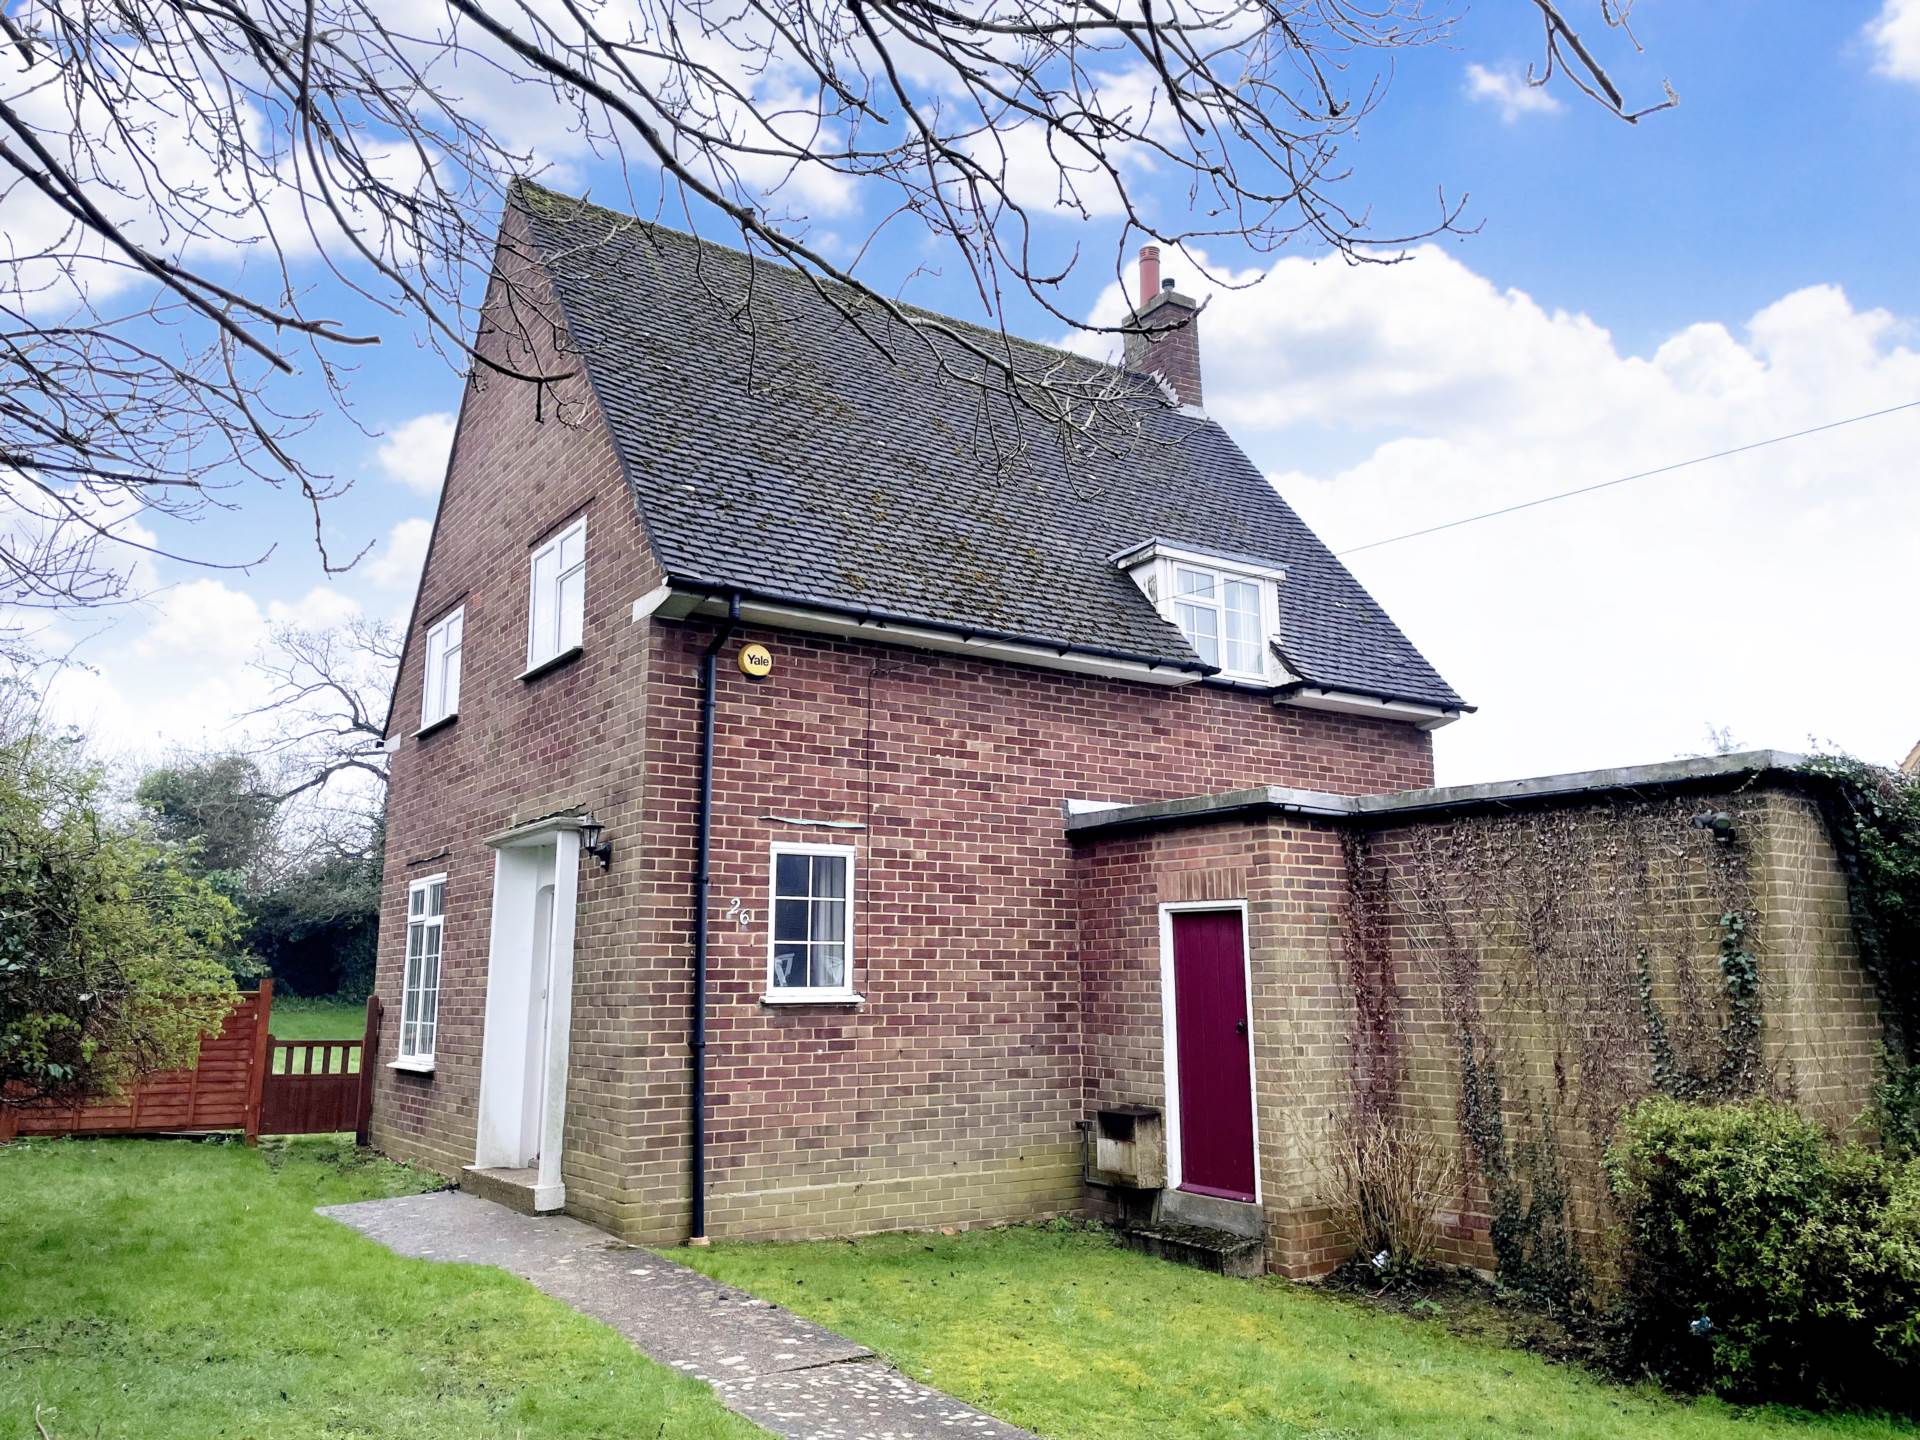 3 bed Detached House for rent in Hemel Hempstead. From Knights Lettings - Boxmoor